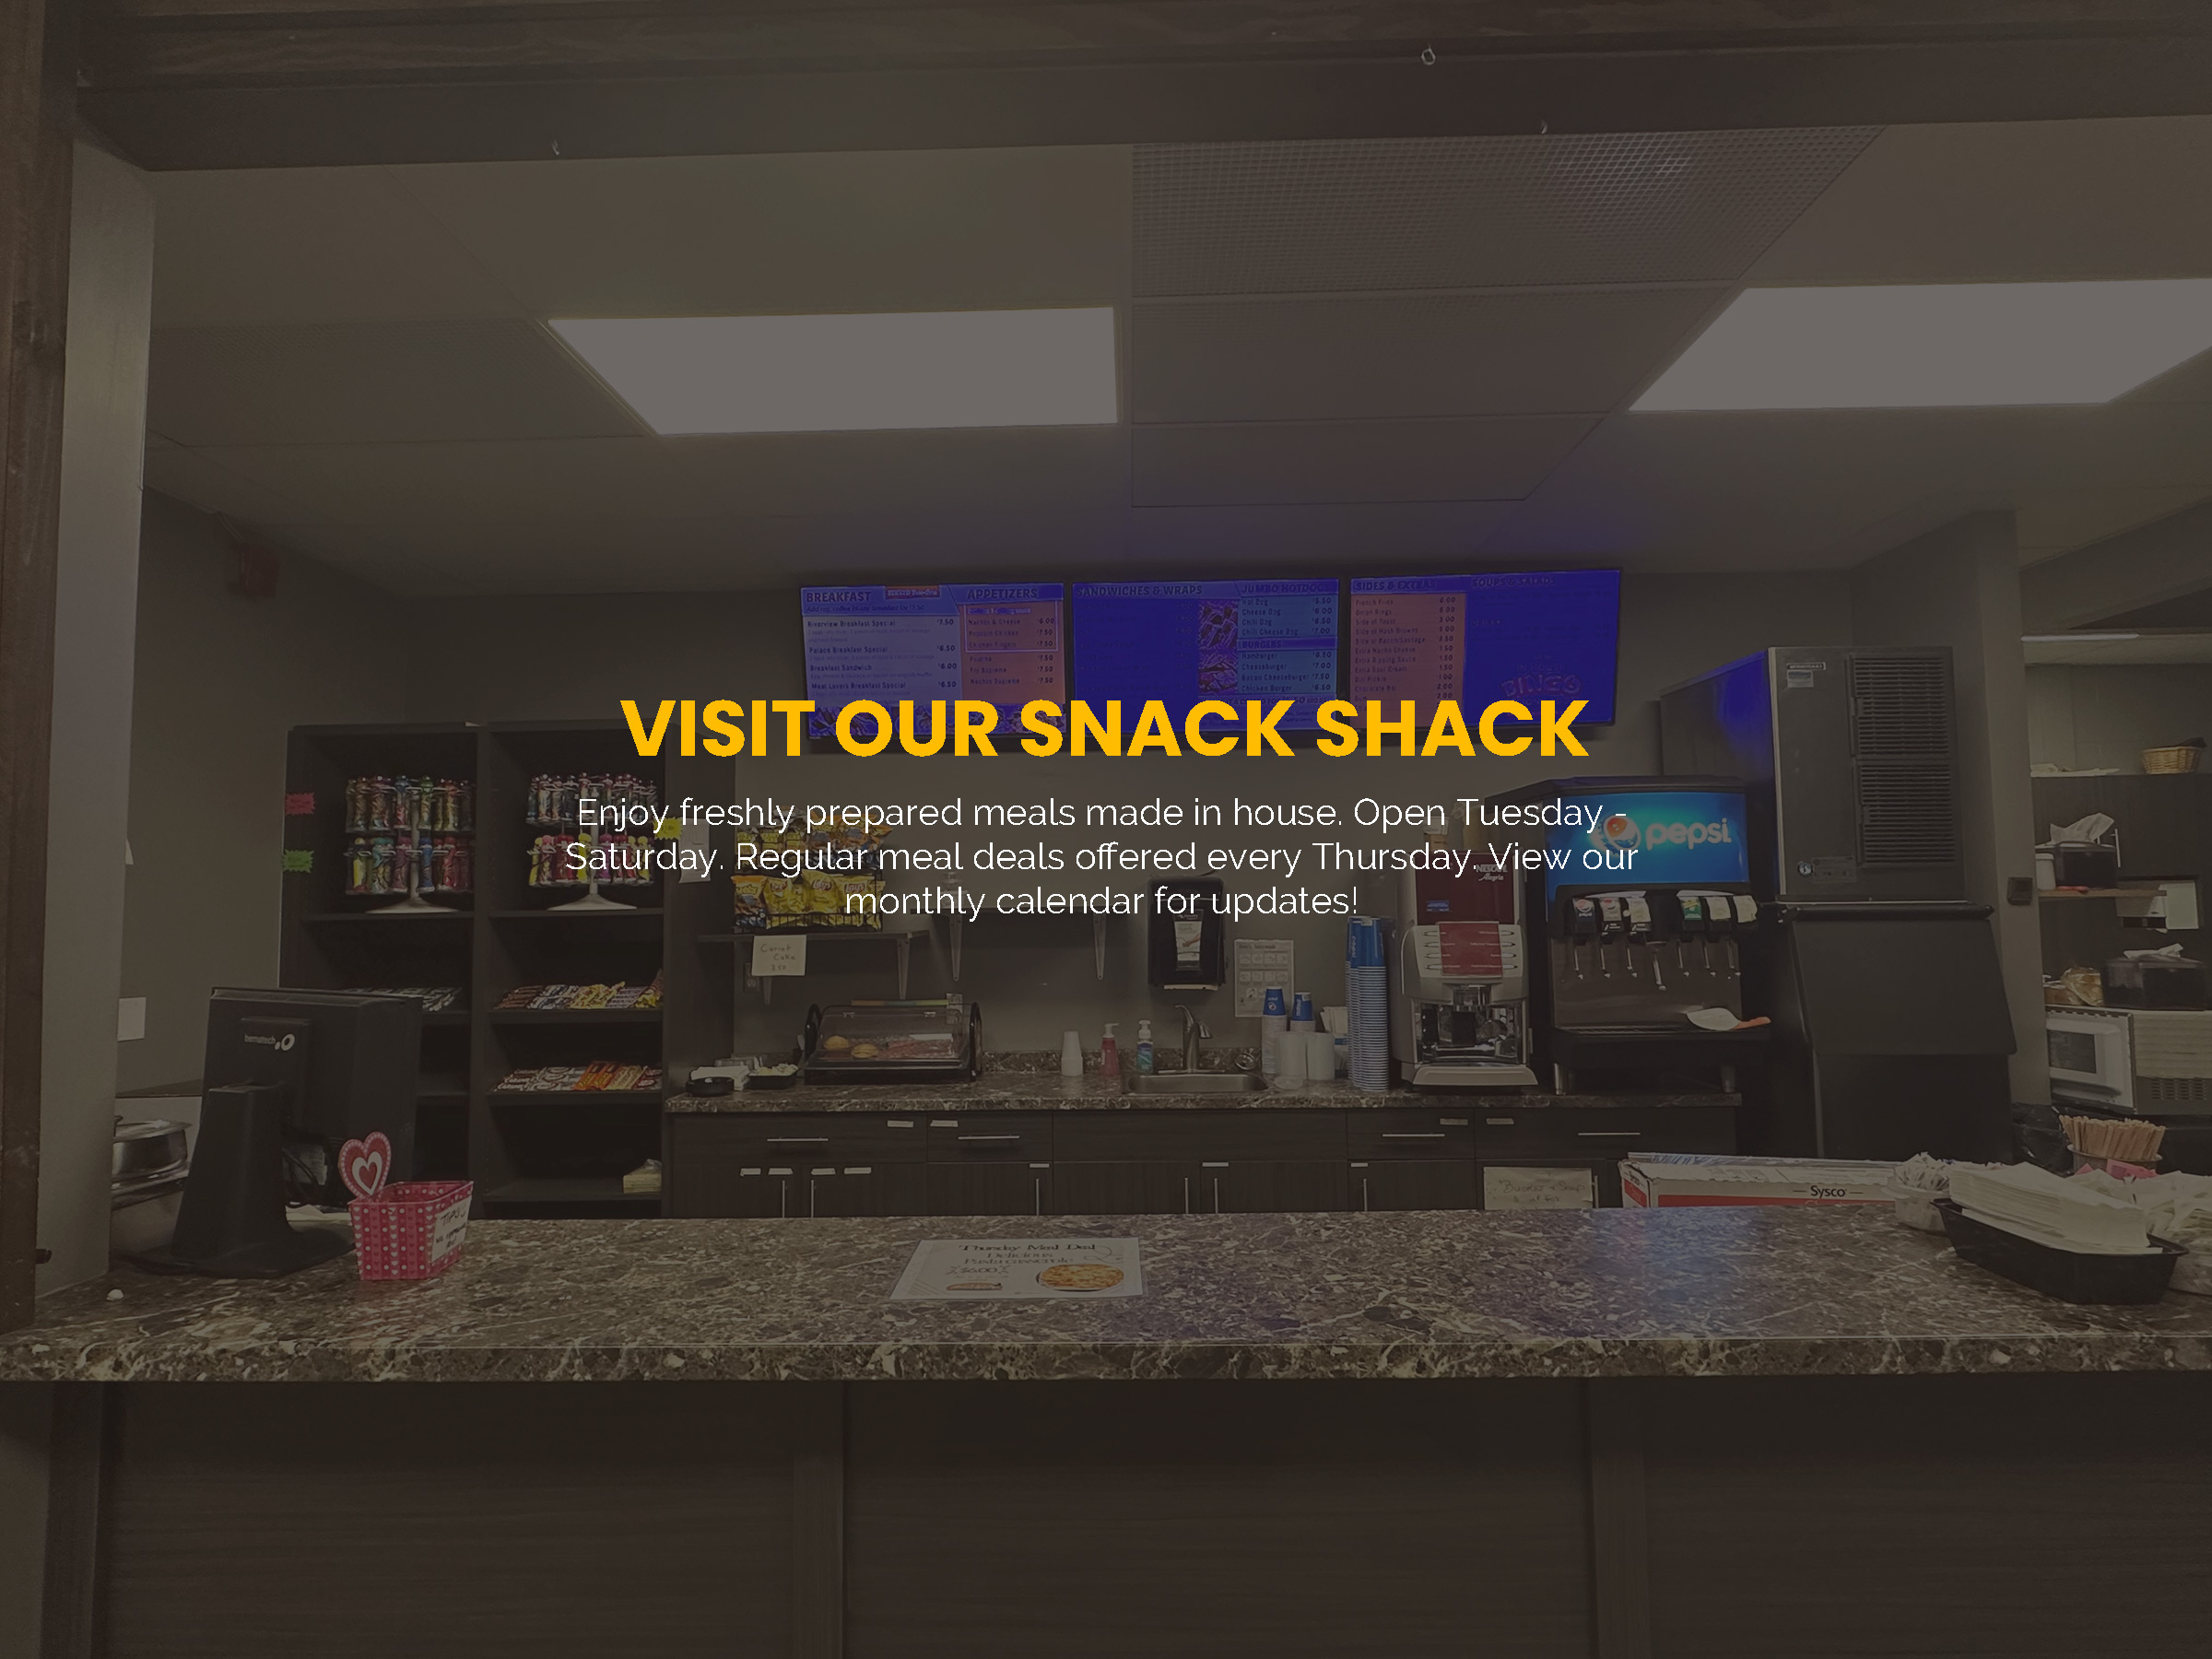 Picture of our Snack Shack with a caption reading "Visit our snack shack. Enjoy freshly prepared meals made in house. Open Tuesday - Saturday. Regular meal deals offered every Thursday. View our monthly calendar for updates!"